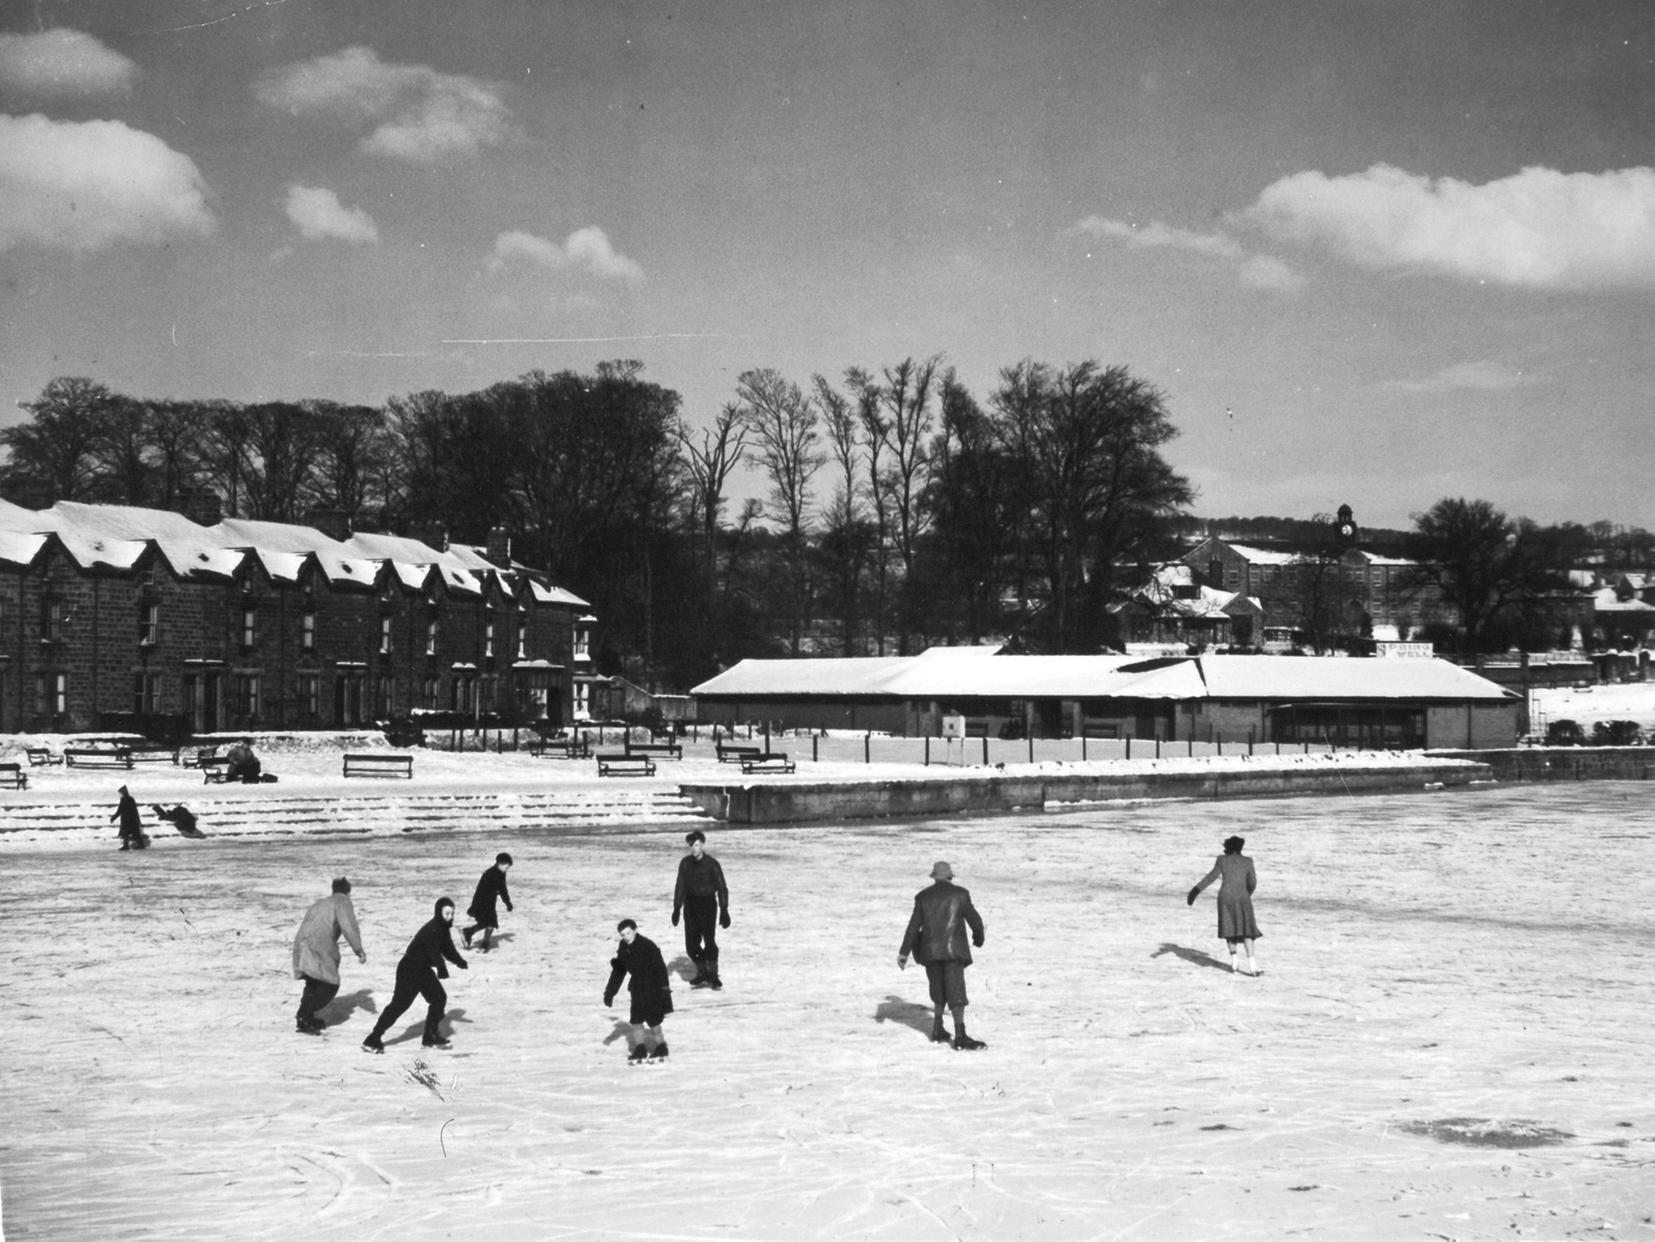 Snow brought out ice skaters who enjoyed fun on the frozen River Wharfe at Otley.